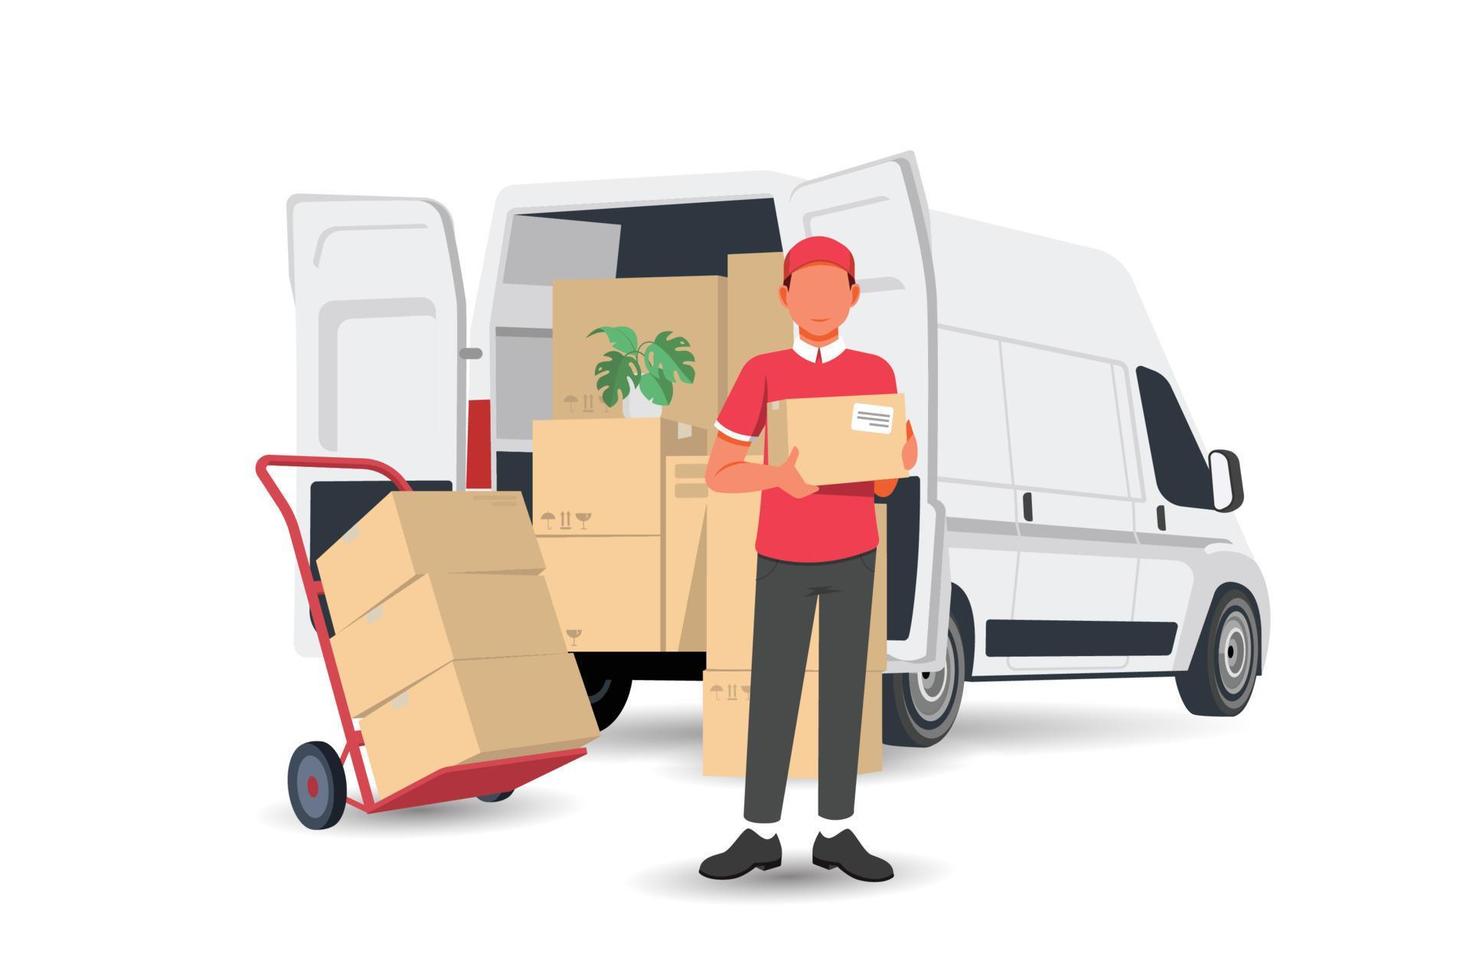 Delivery man with a box and white Van car. Vector illustration in flat style